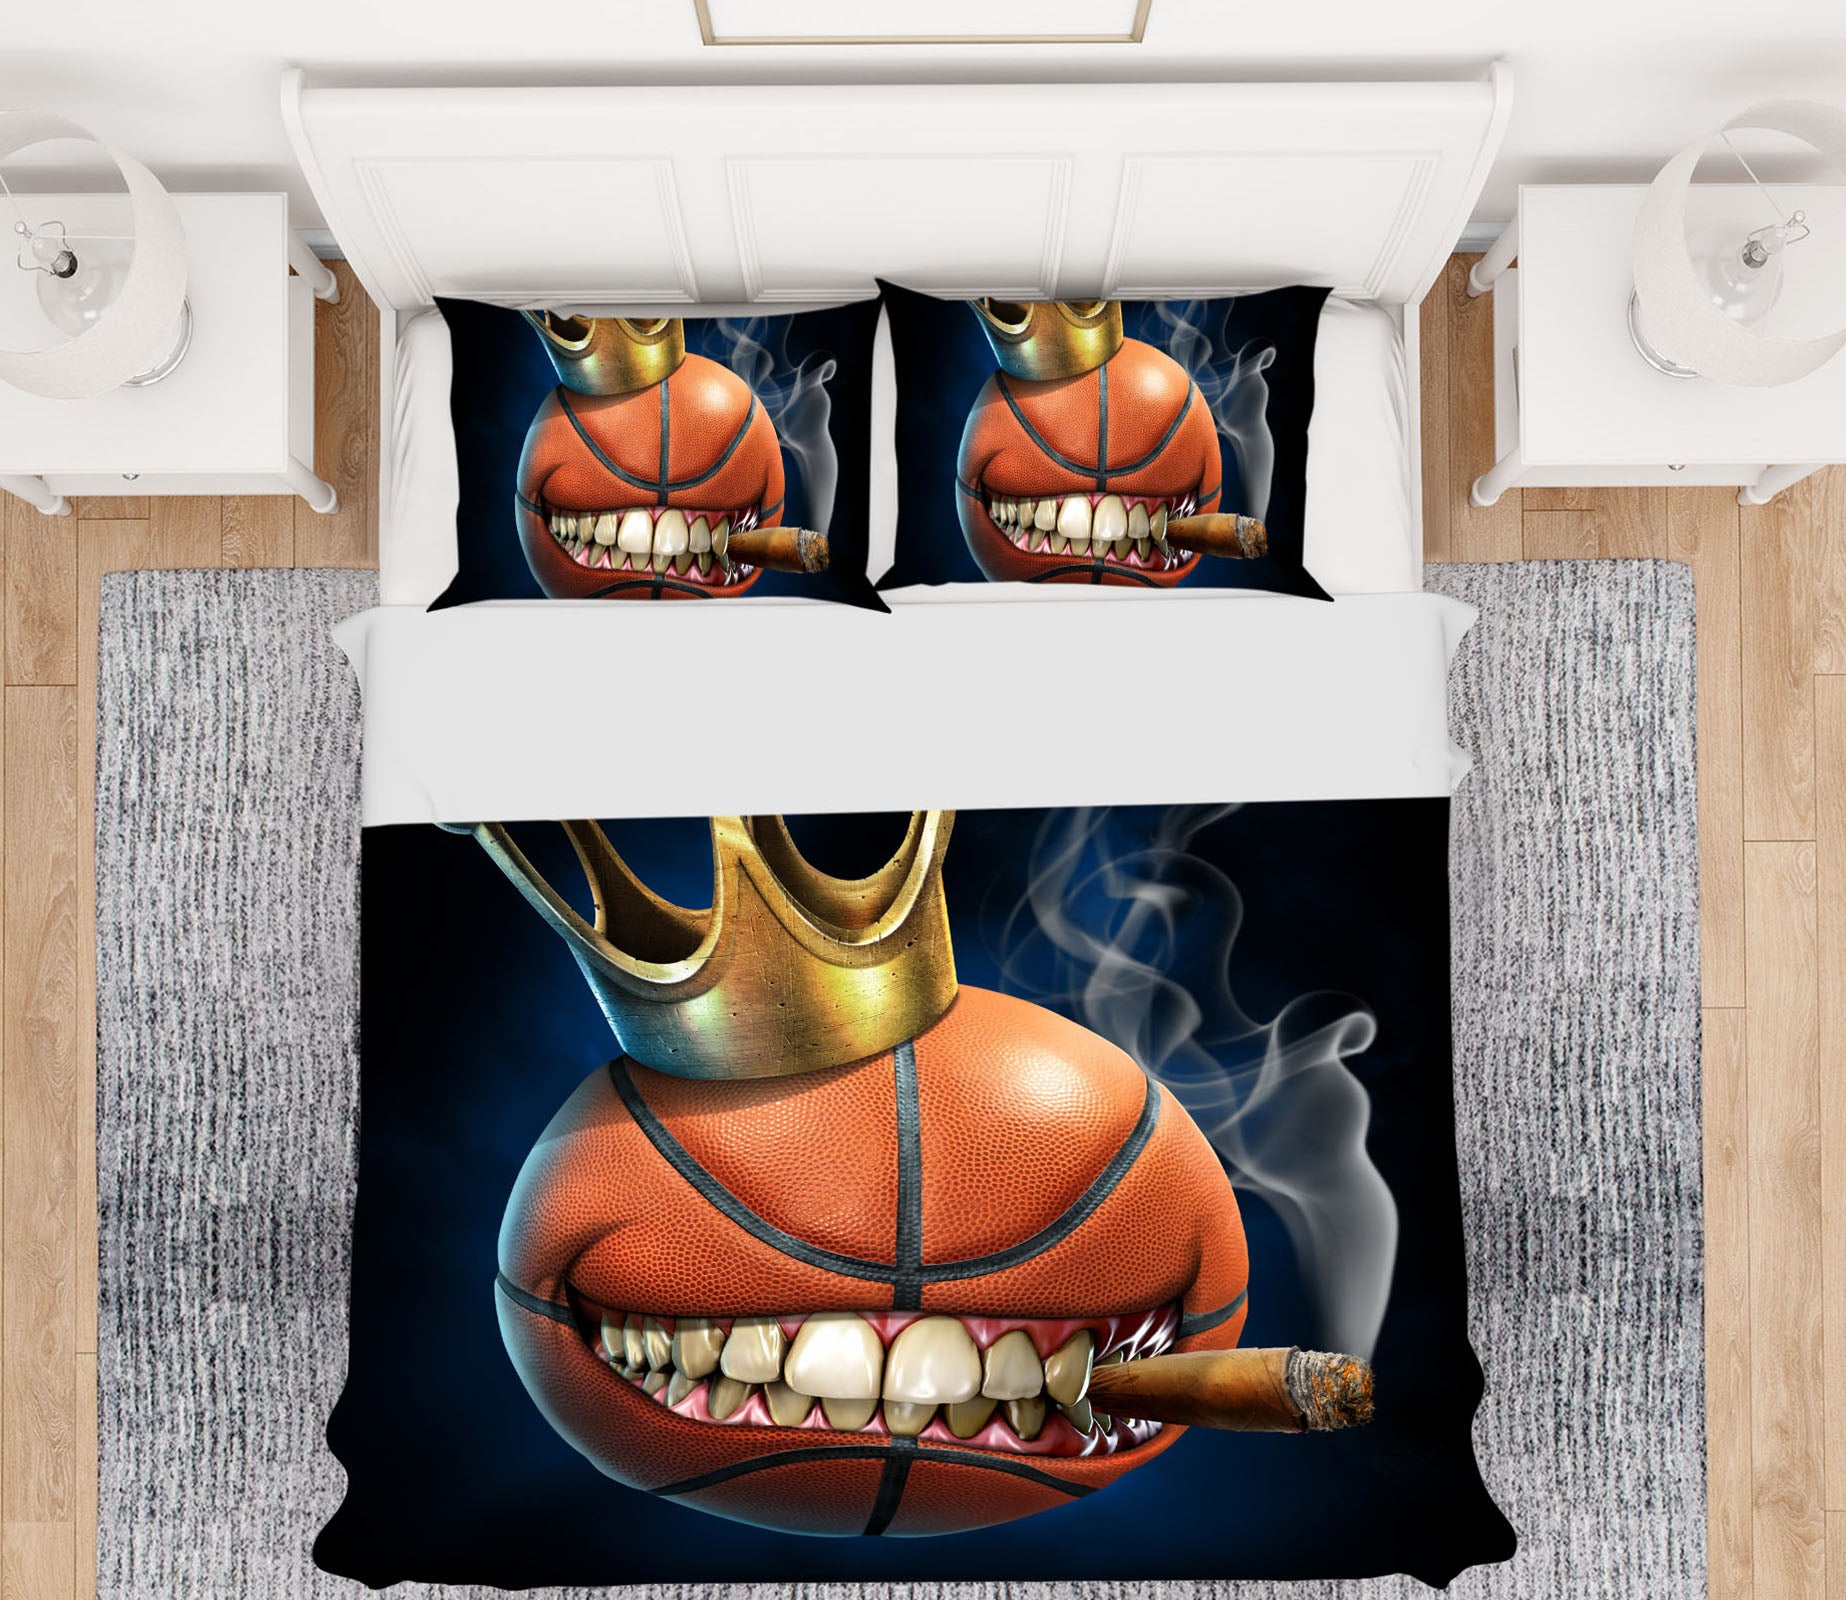 3D Basketball Tooth Smoke Crown 4052 Tom Wood Bedding Bed Pillowcases Quilt